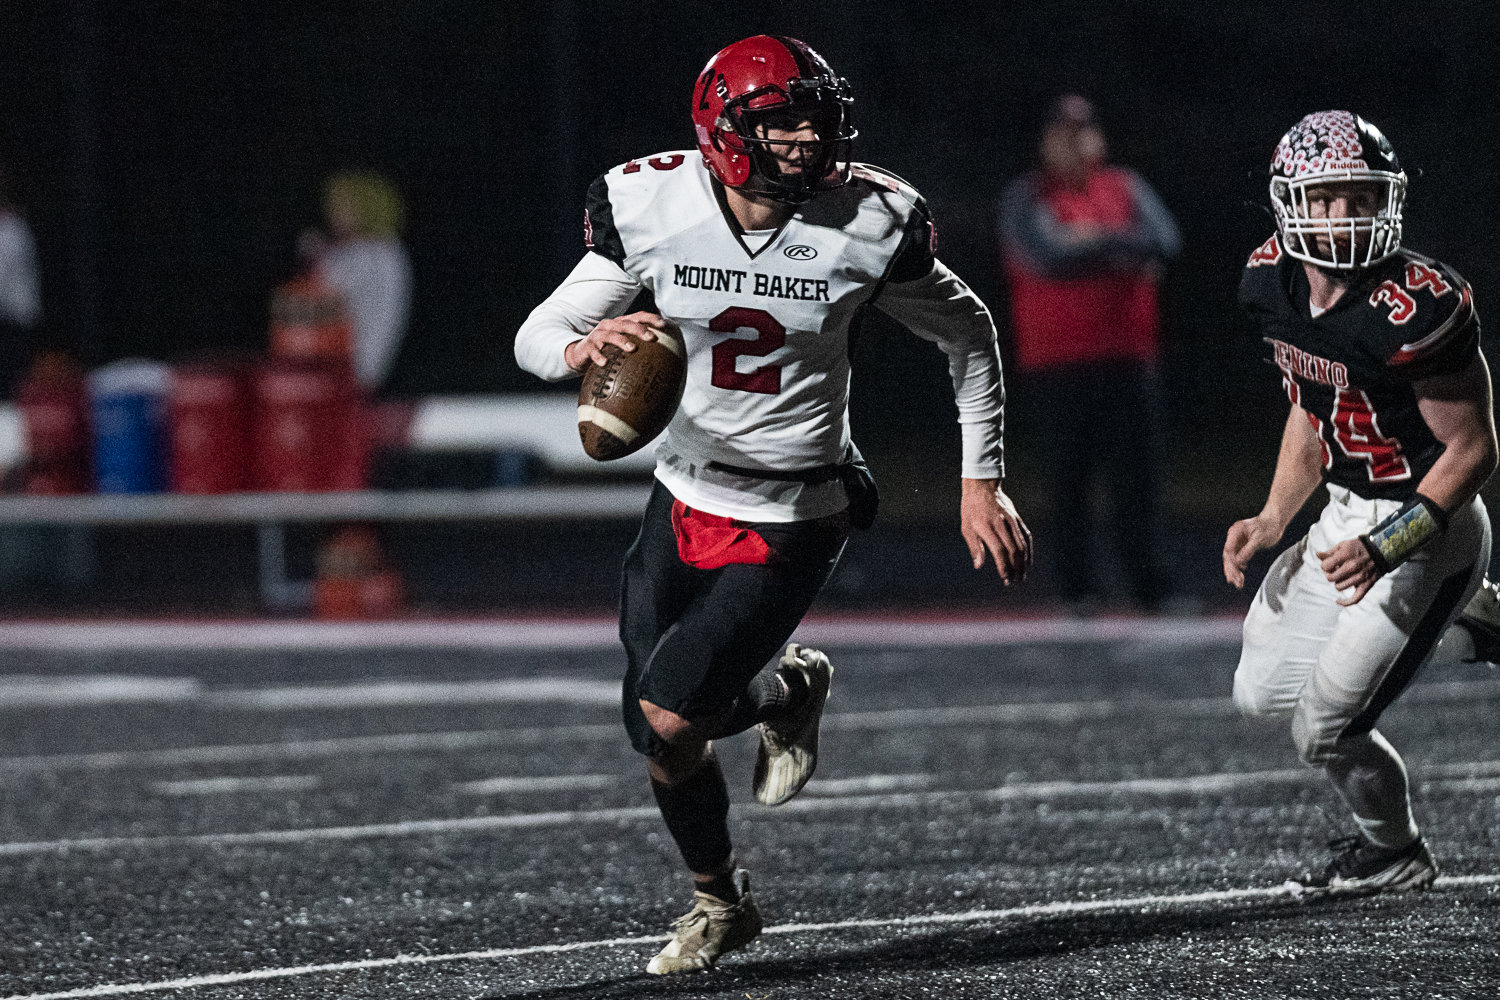 Mount Baker quarterback Landon Smith runs to the outside against Tenino in the first round of the 1A state tournament on Nov. 11. The Mountaineers won 37-26.